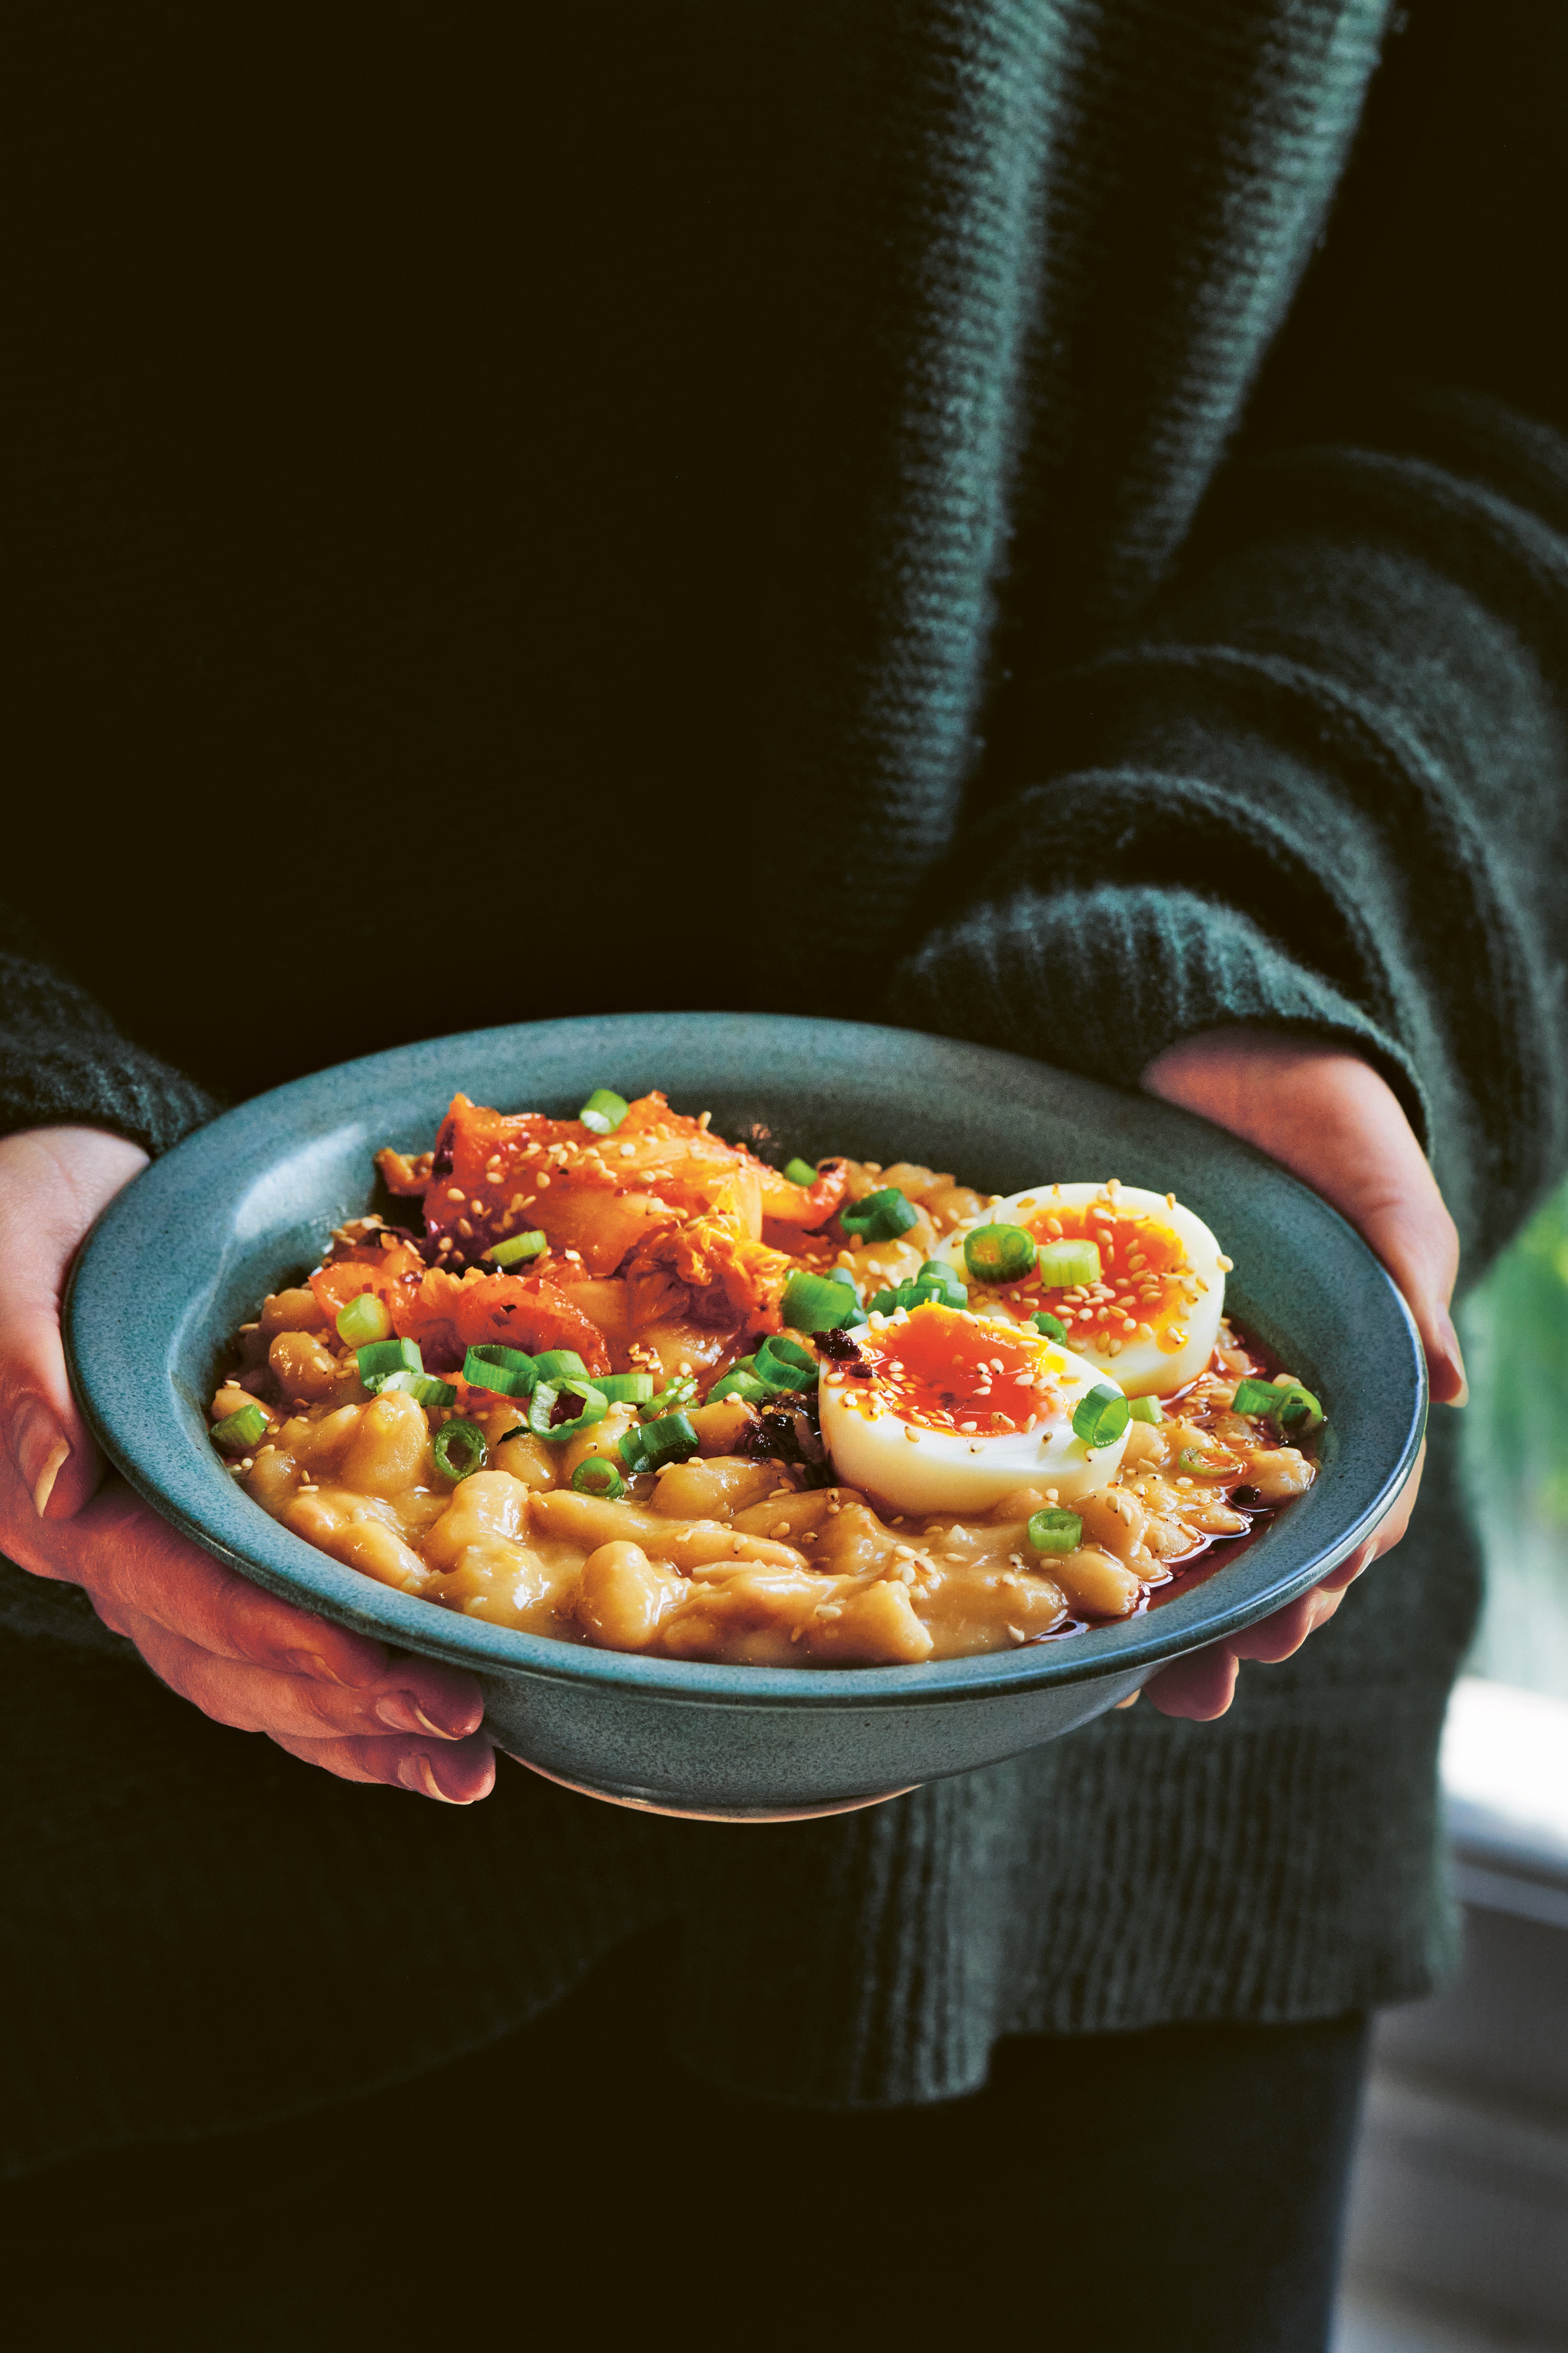 Miso paste plus creamy, soft white beans is a thing of magic